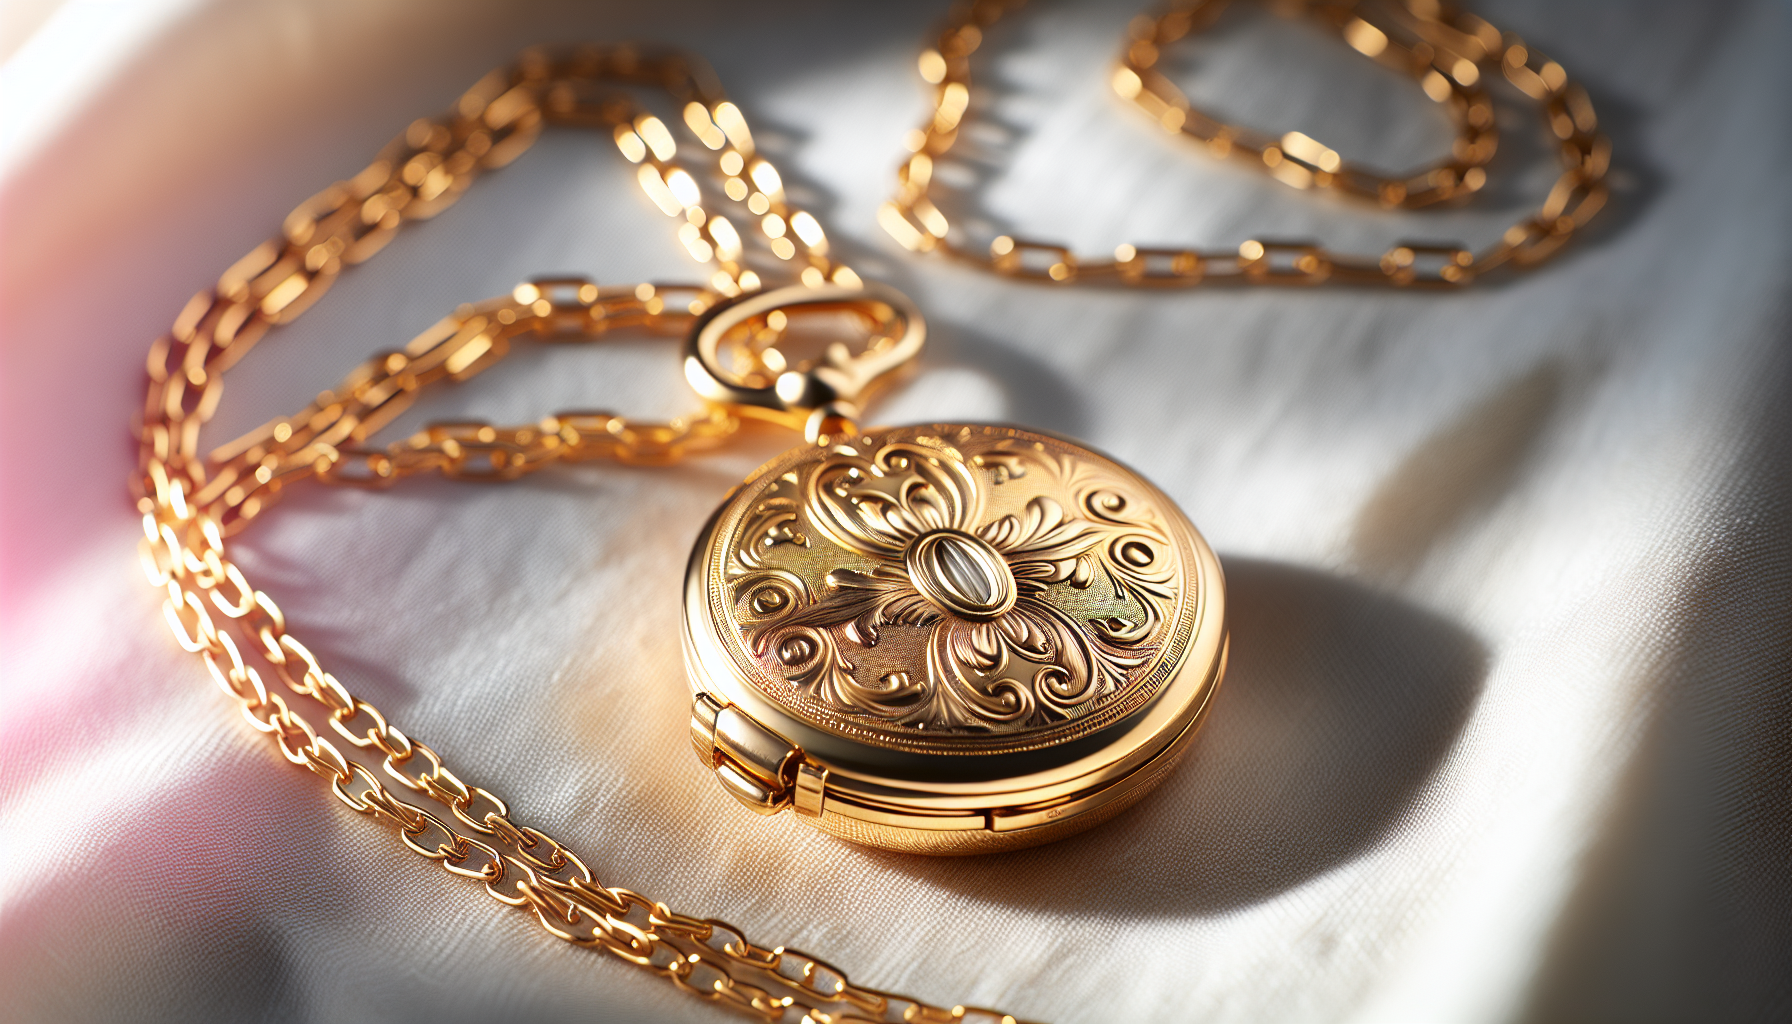 An image exuding timeless elegance defined by gold locket chains. Showcase a close-up view of a golden locket suspended from a chain. The locket features intricate, delicate engravings and the chain i